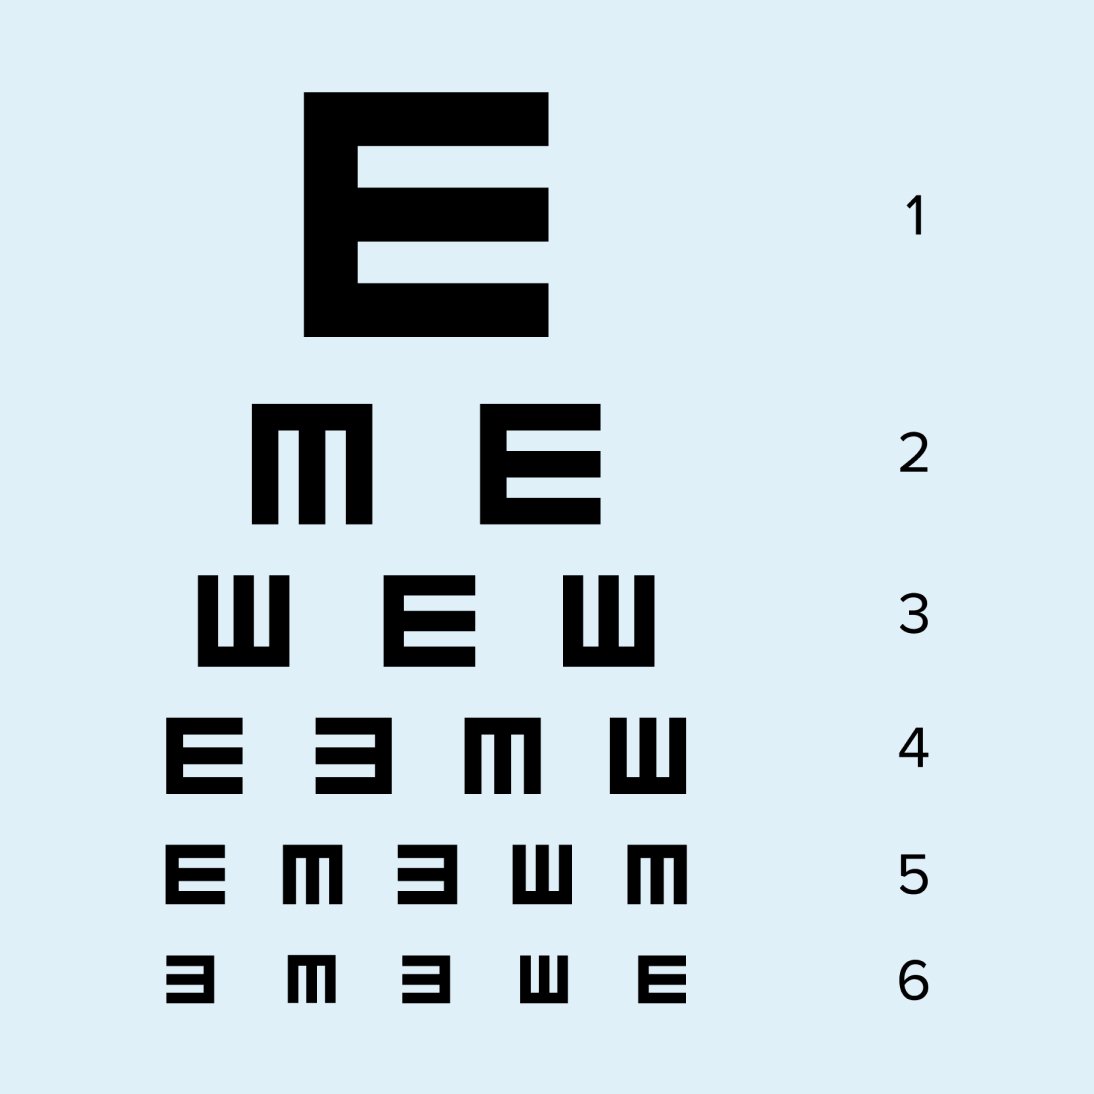 https://www.warbyparker.com/learn/wp-content/uploads/2023/03/what-is-visual-acuity-random.jpg